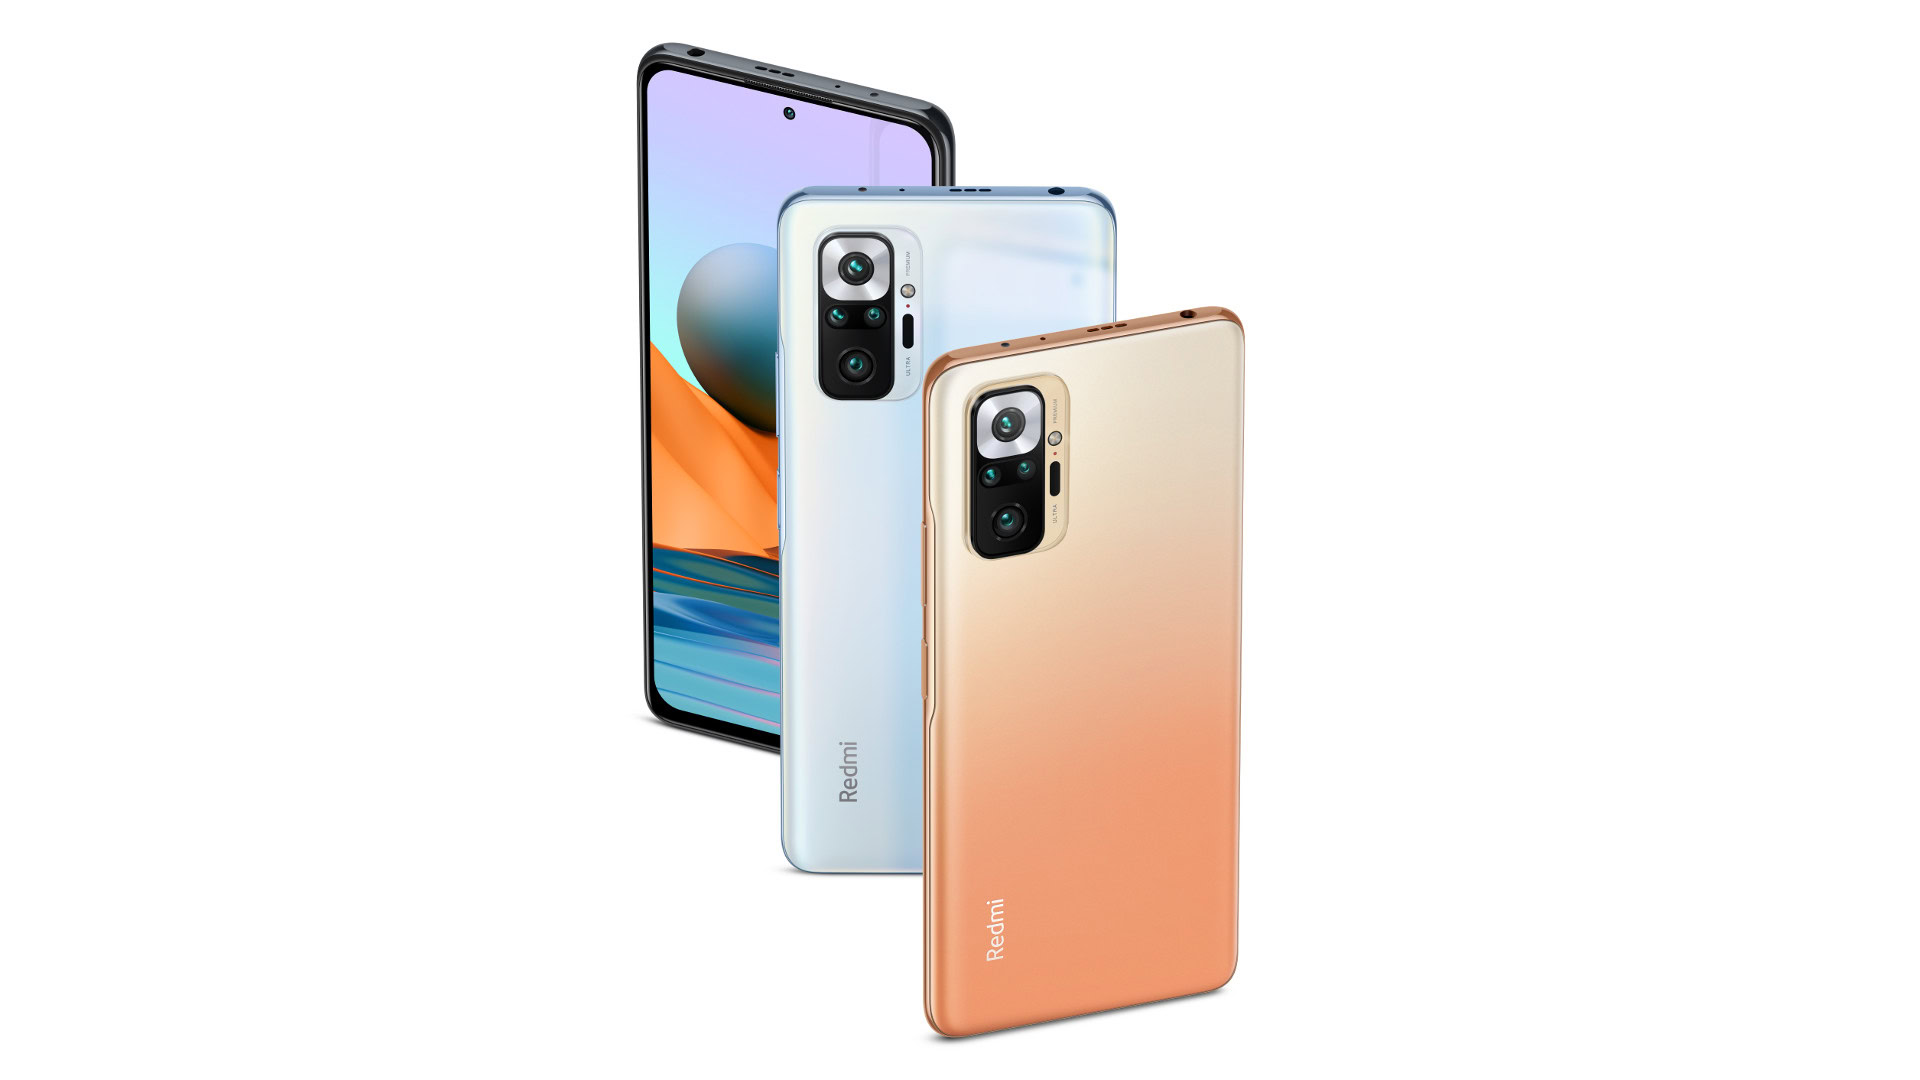 Redmi Note 10 Pro official image